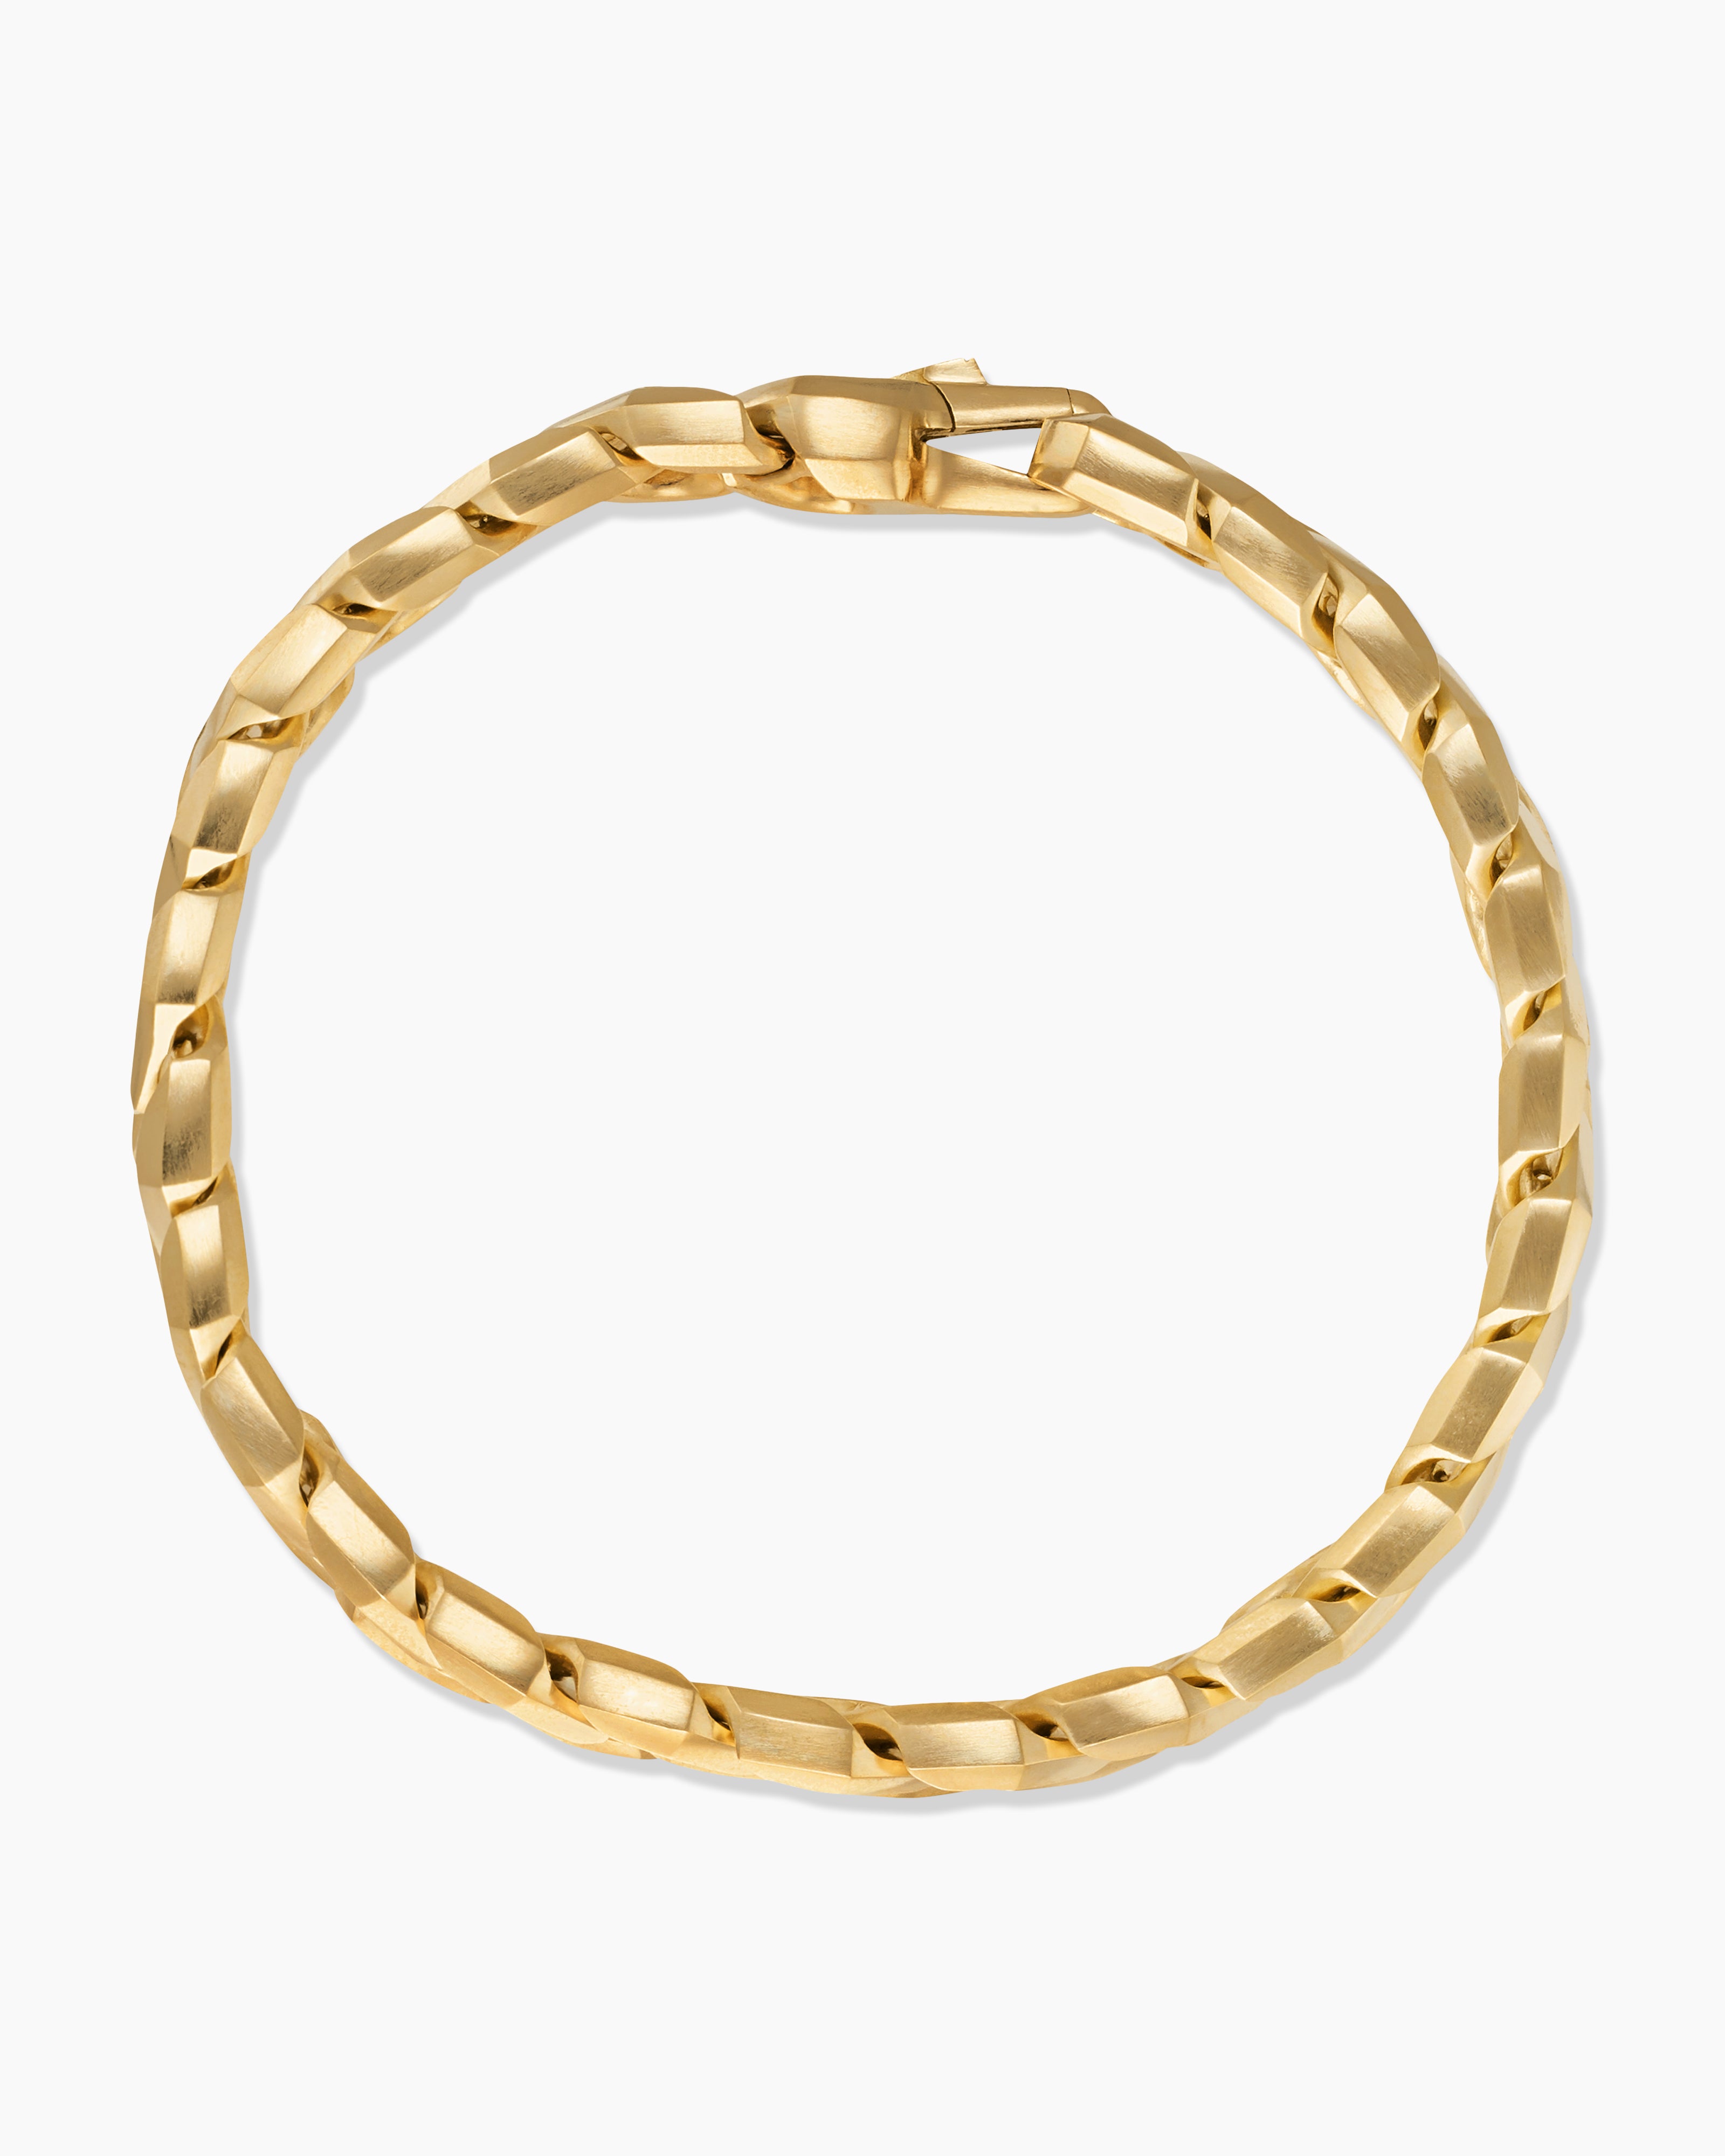 Curb Chain Angular Link Bracelet in 18K Yellow Gold, 8.7mm